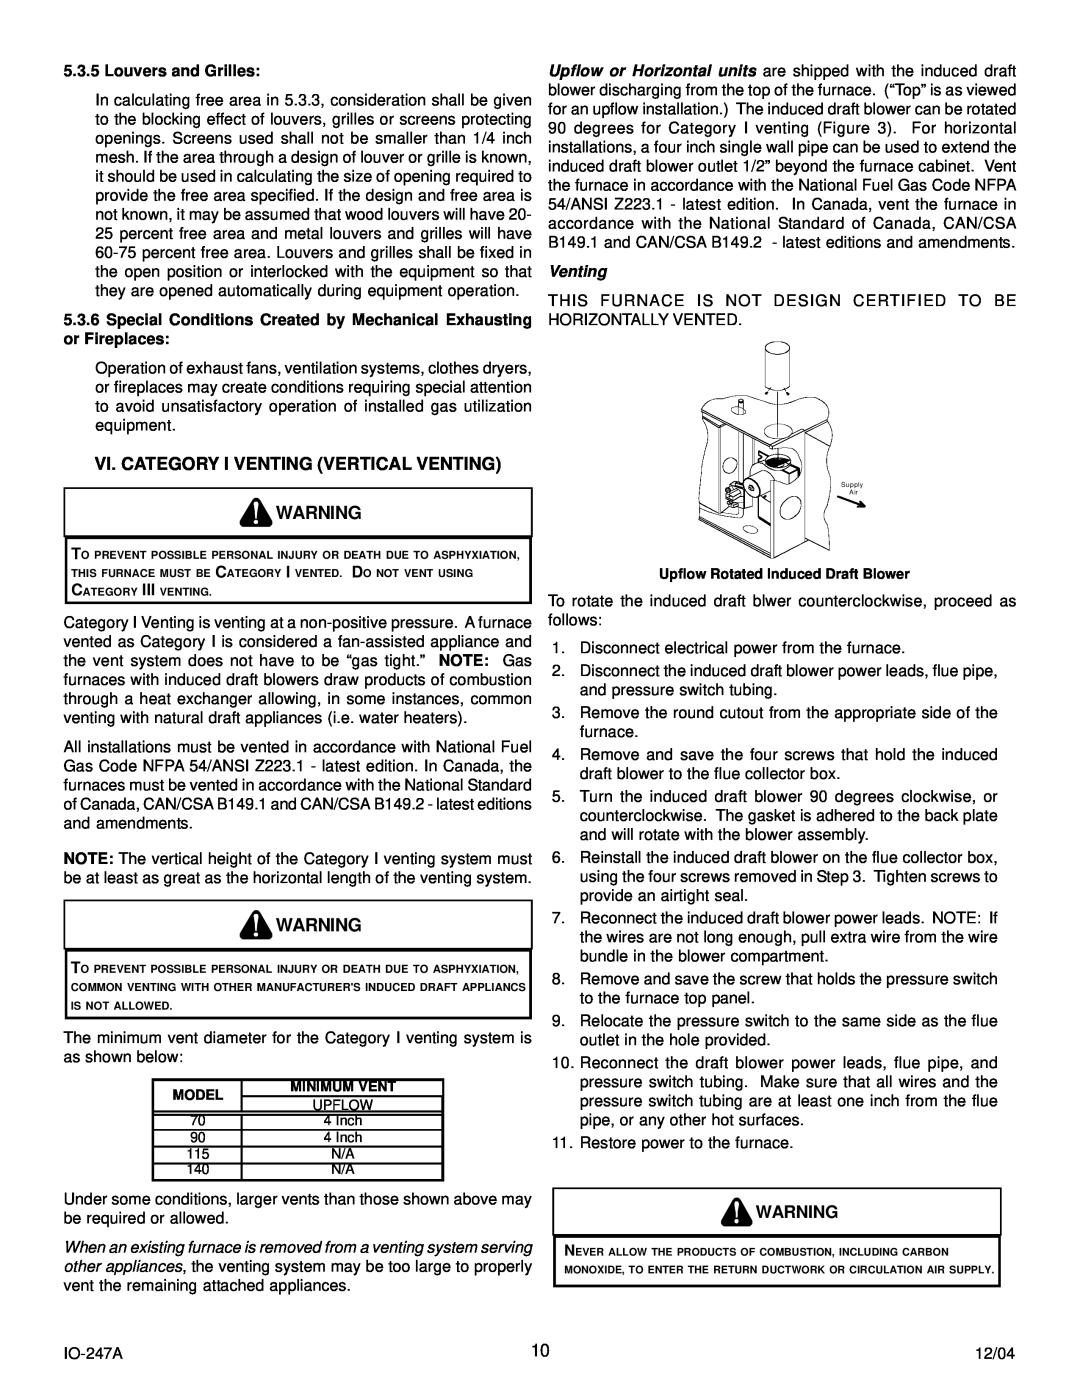 Goodman Mfg AMV8 instruction manual Vi. Category I Venting Vertical Venting, Louvers and Grilles 